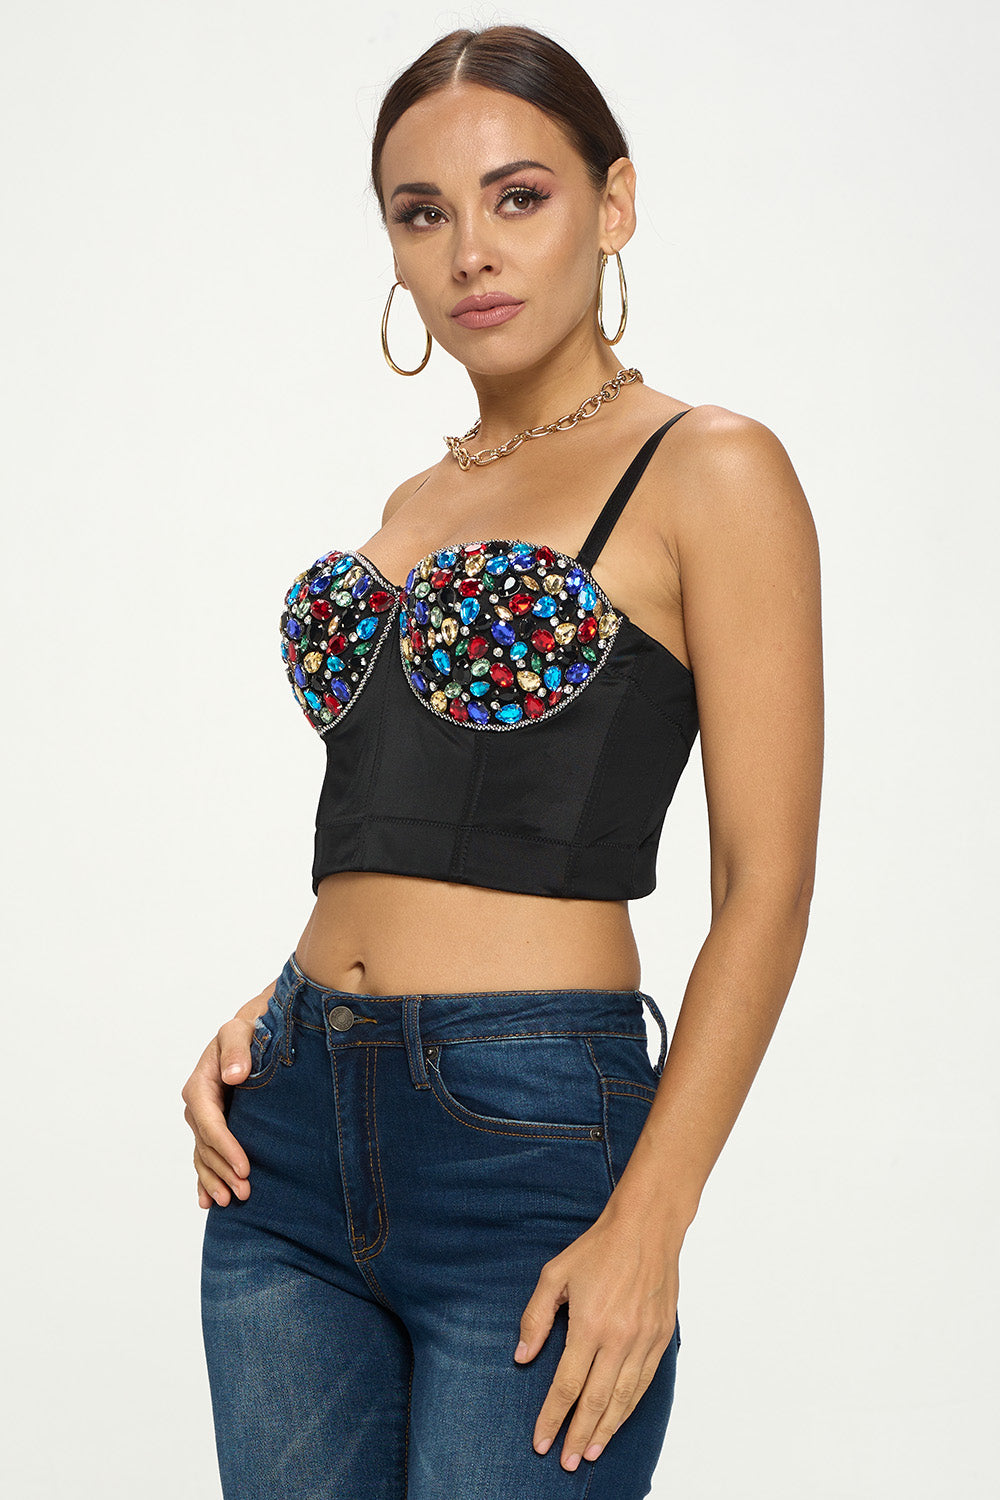 MULTI-COLORED CRYSTAL STONE EMBELLISHED BUSTIER TOP